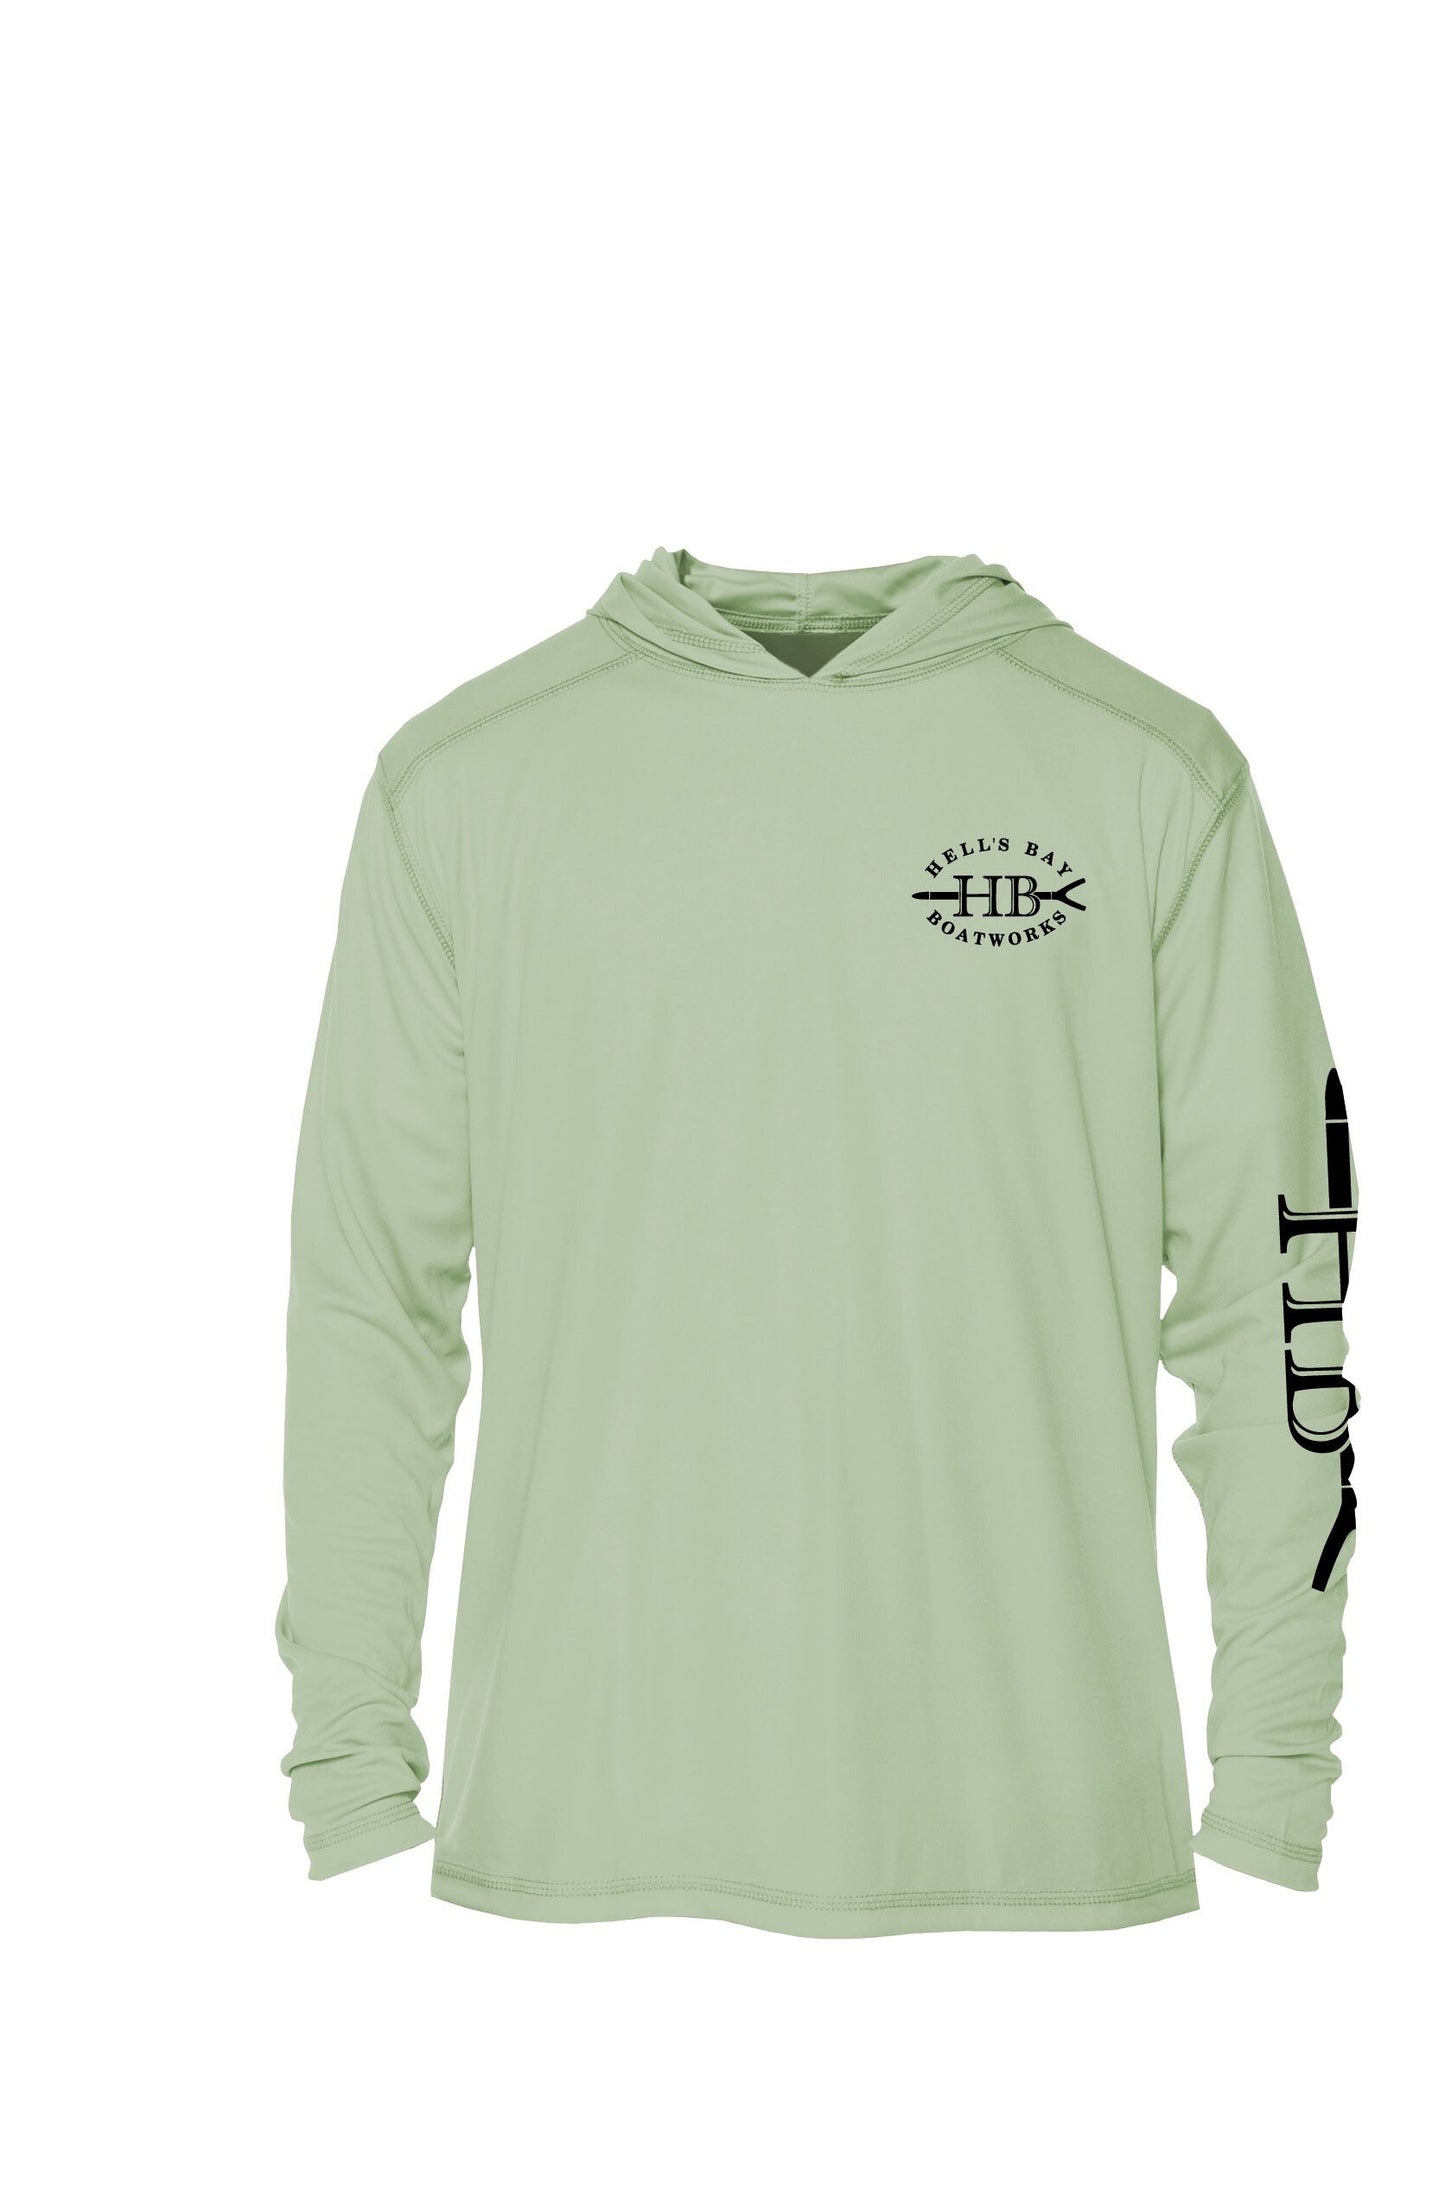 Solar Hoodie L/S Performance Shirt - Sage – Hell's Bay Boatworks Shop